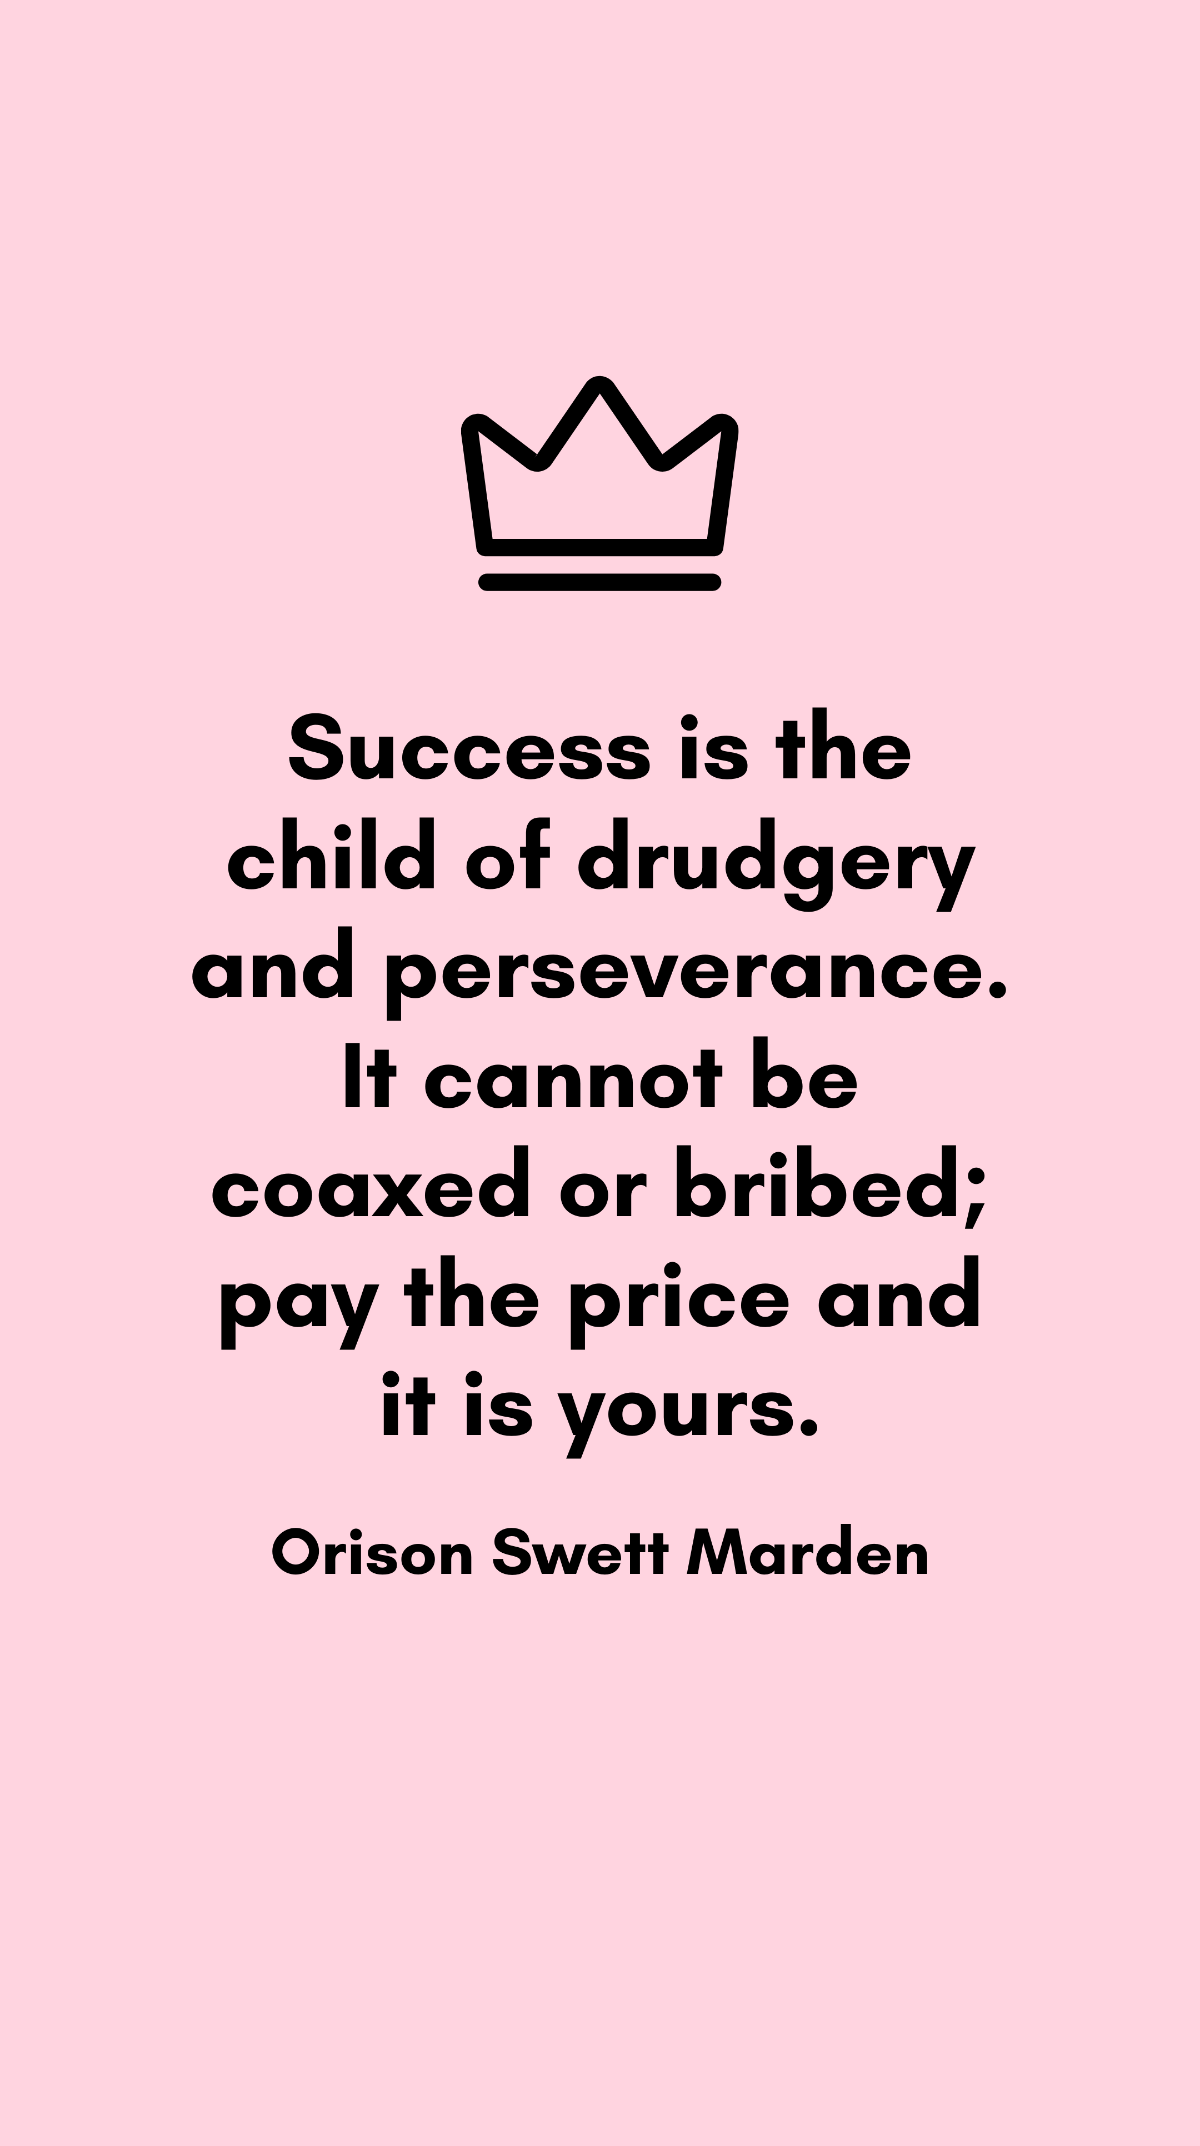 Orison Swett Marden - Success is the child of drudgery and perseverance. It cannot be coaxed or bribed; pay the price and it is yours.